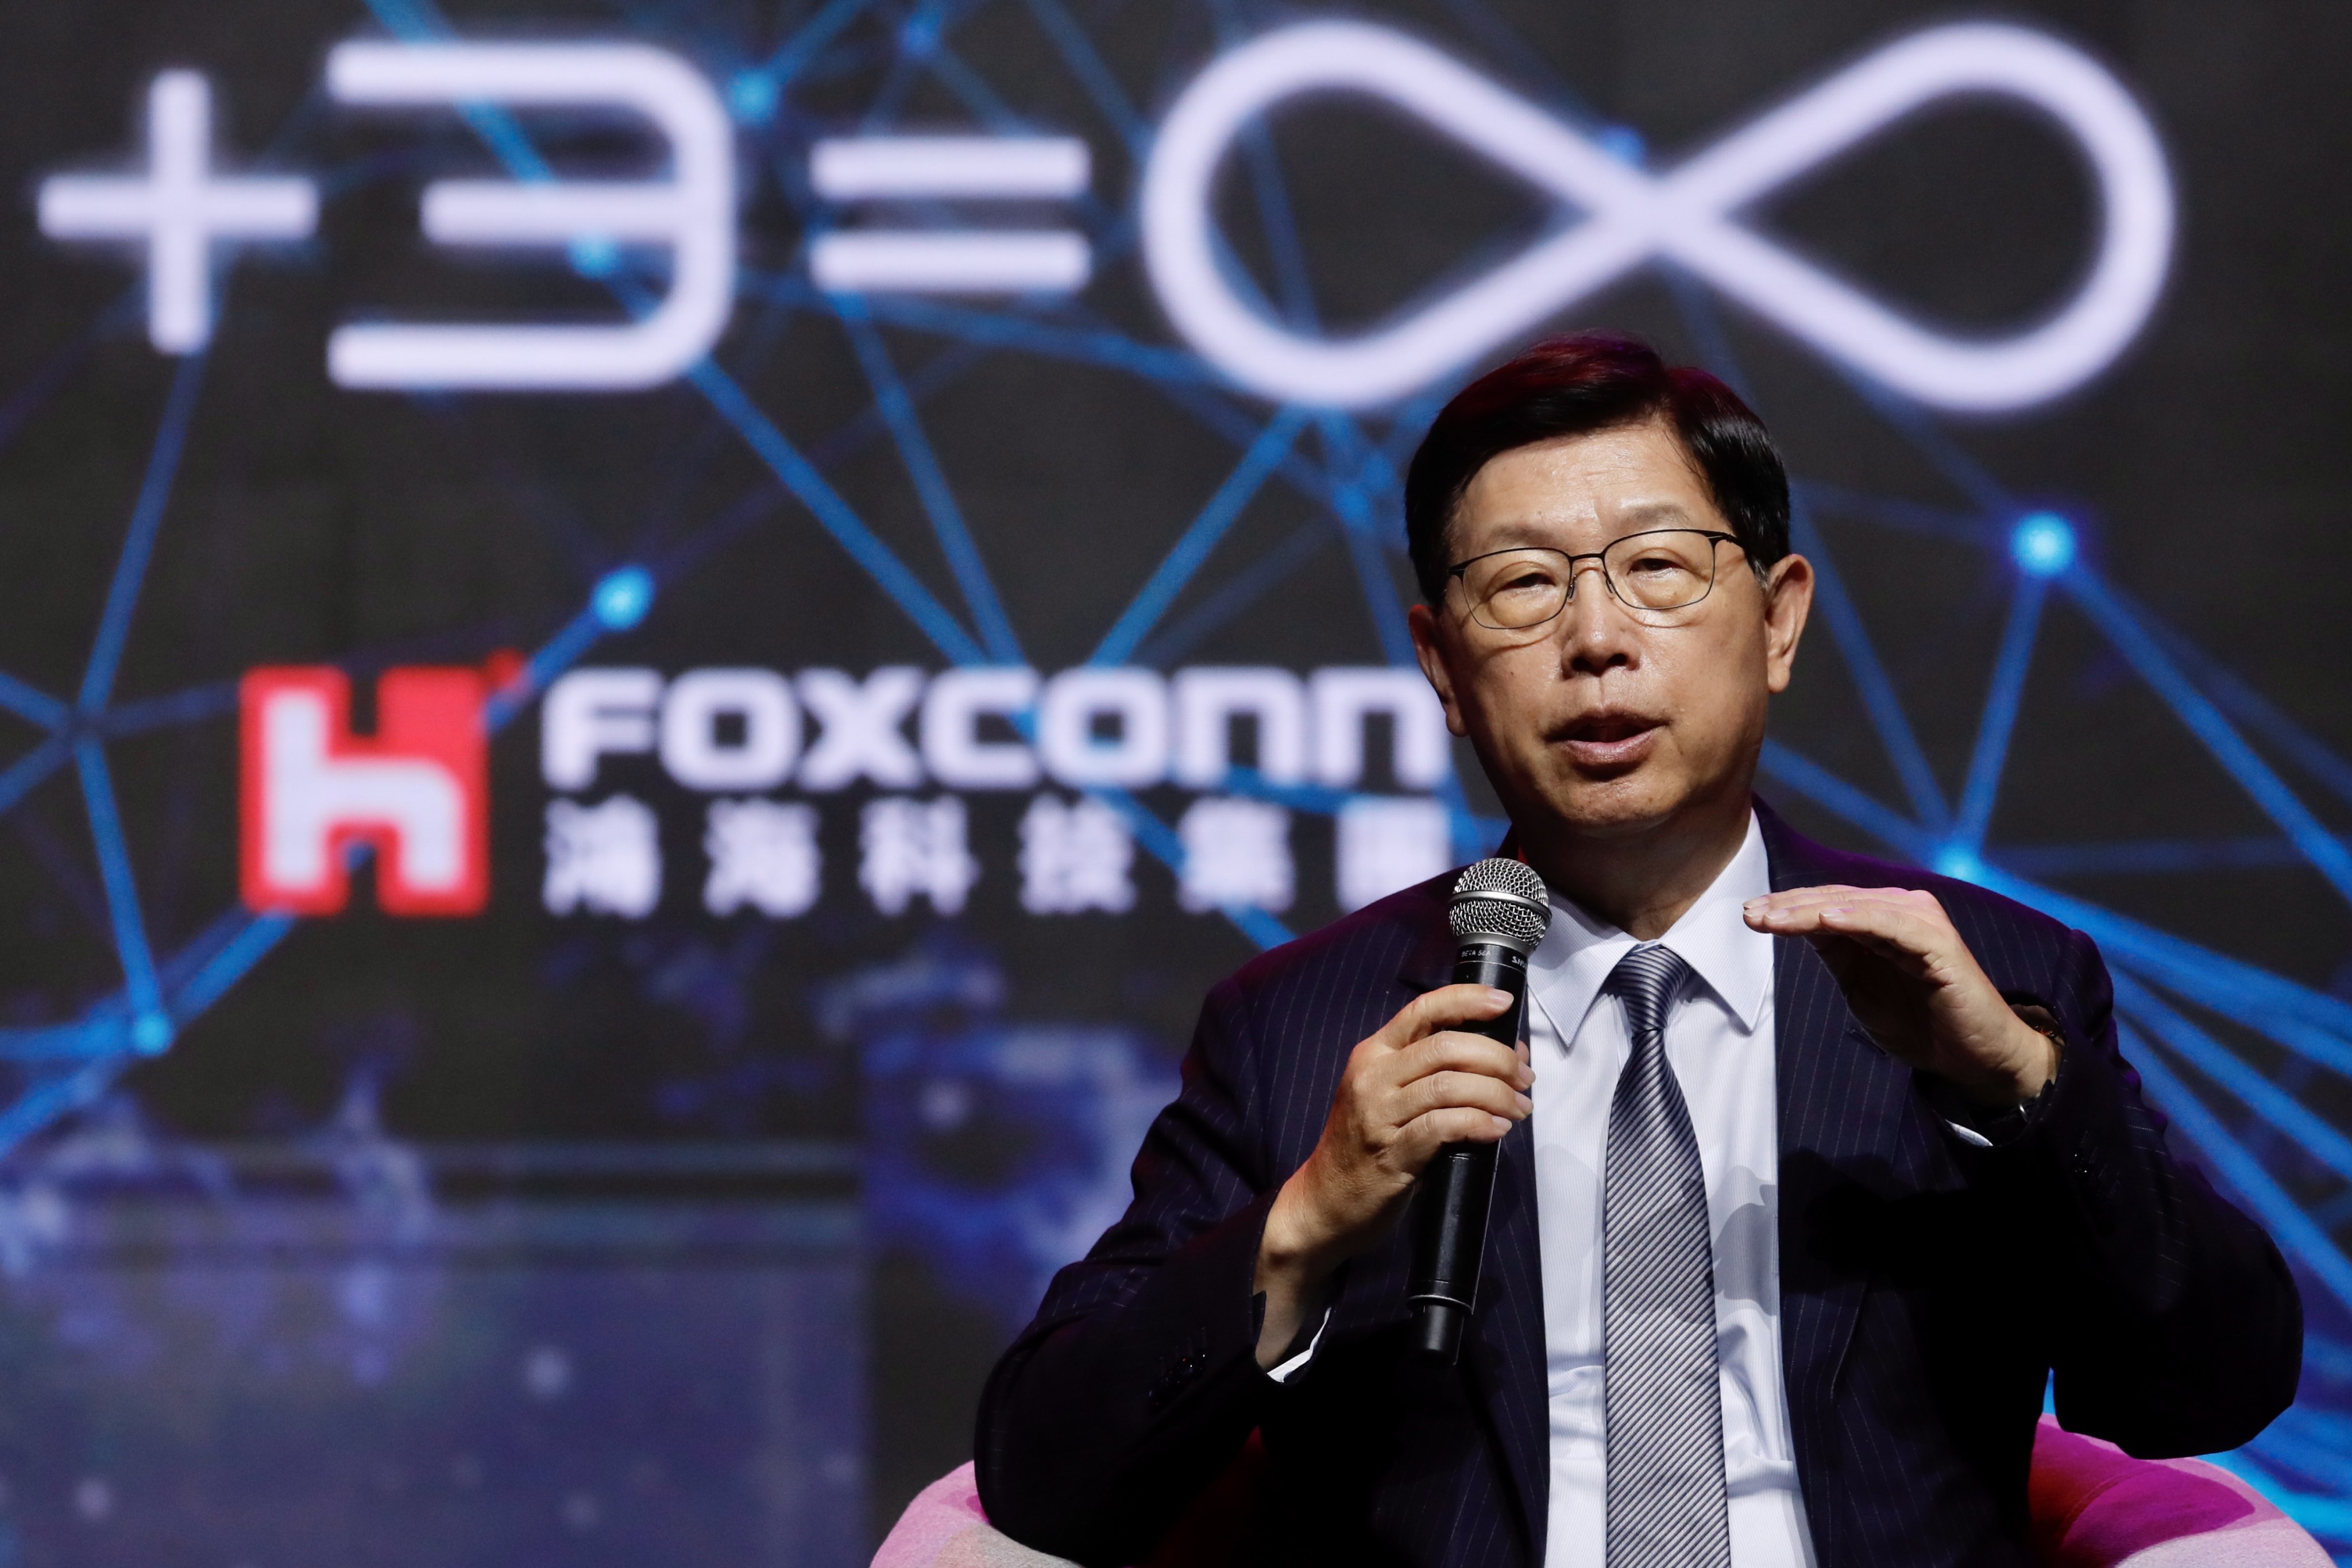 Liu Young-way, chairman and chief executive of Foxconn Technology Group, speaks at the Taiwanese company’s electric vehicle launch in Taipei on October 18, 2022. Photo: EPA-EFE